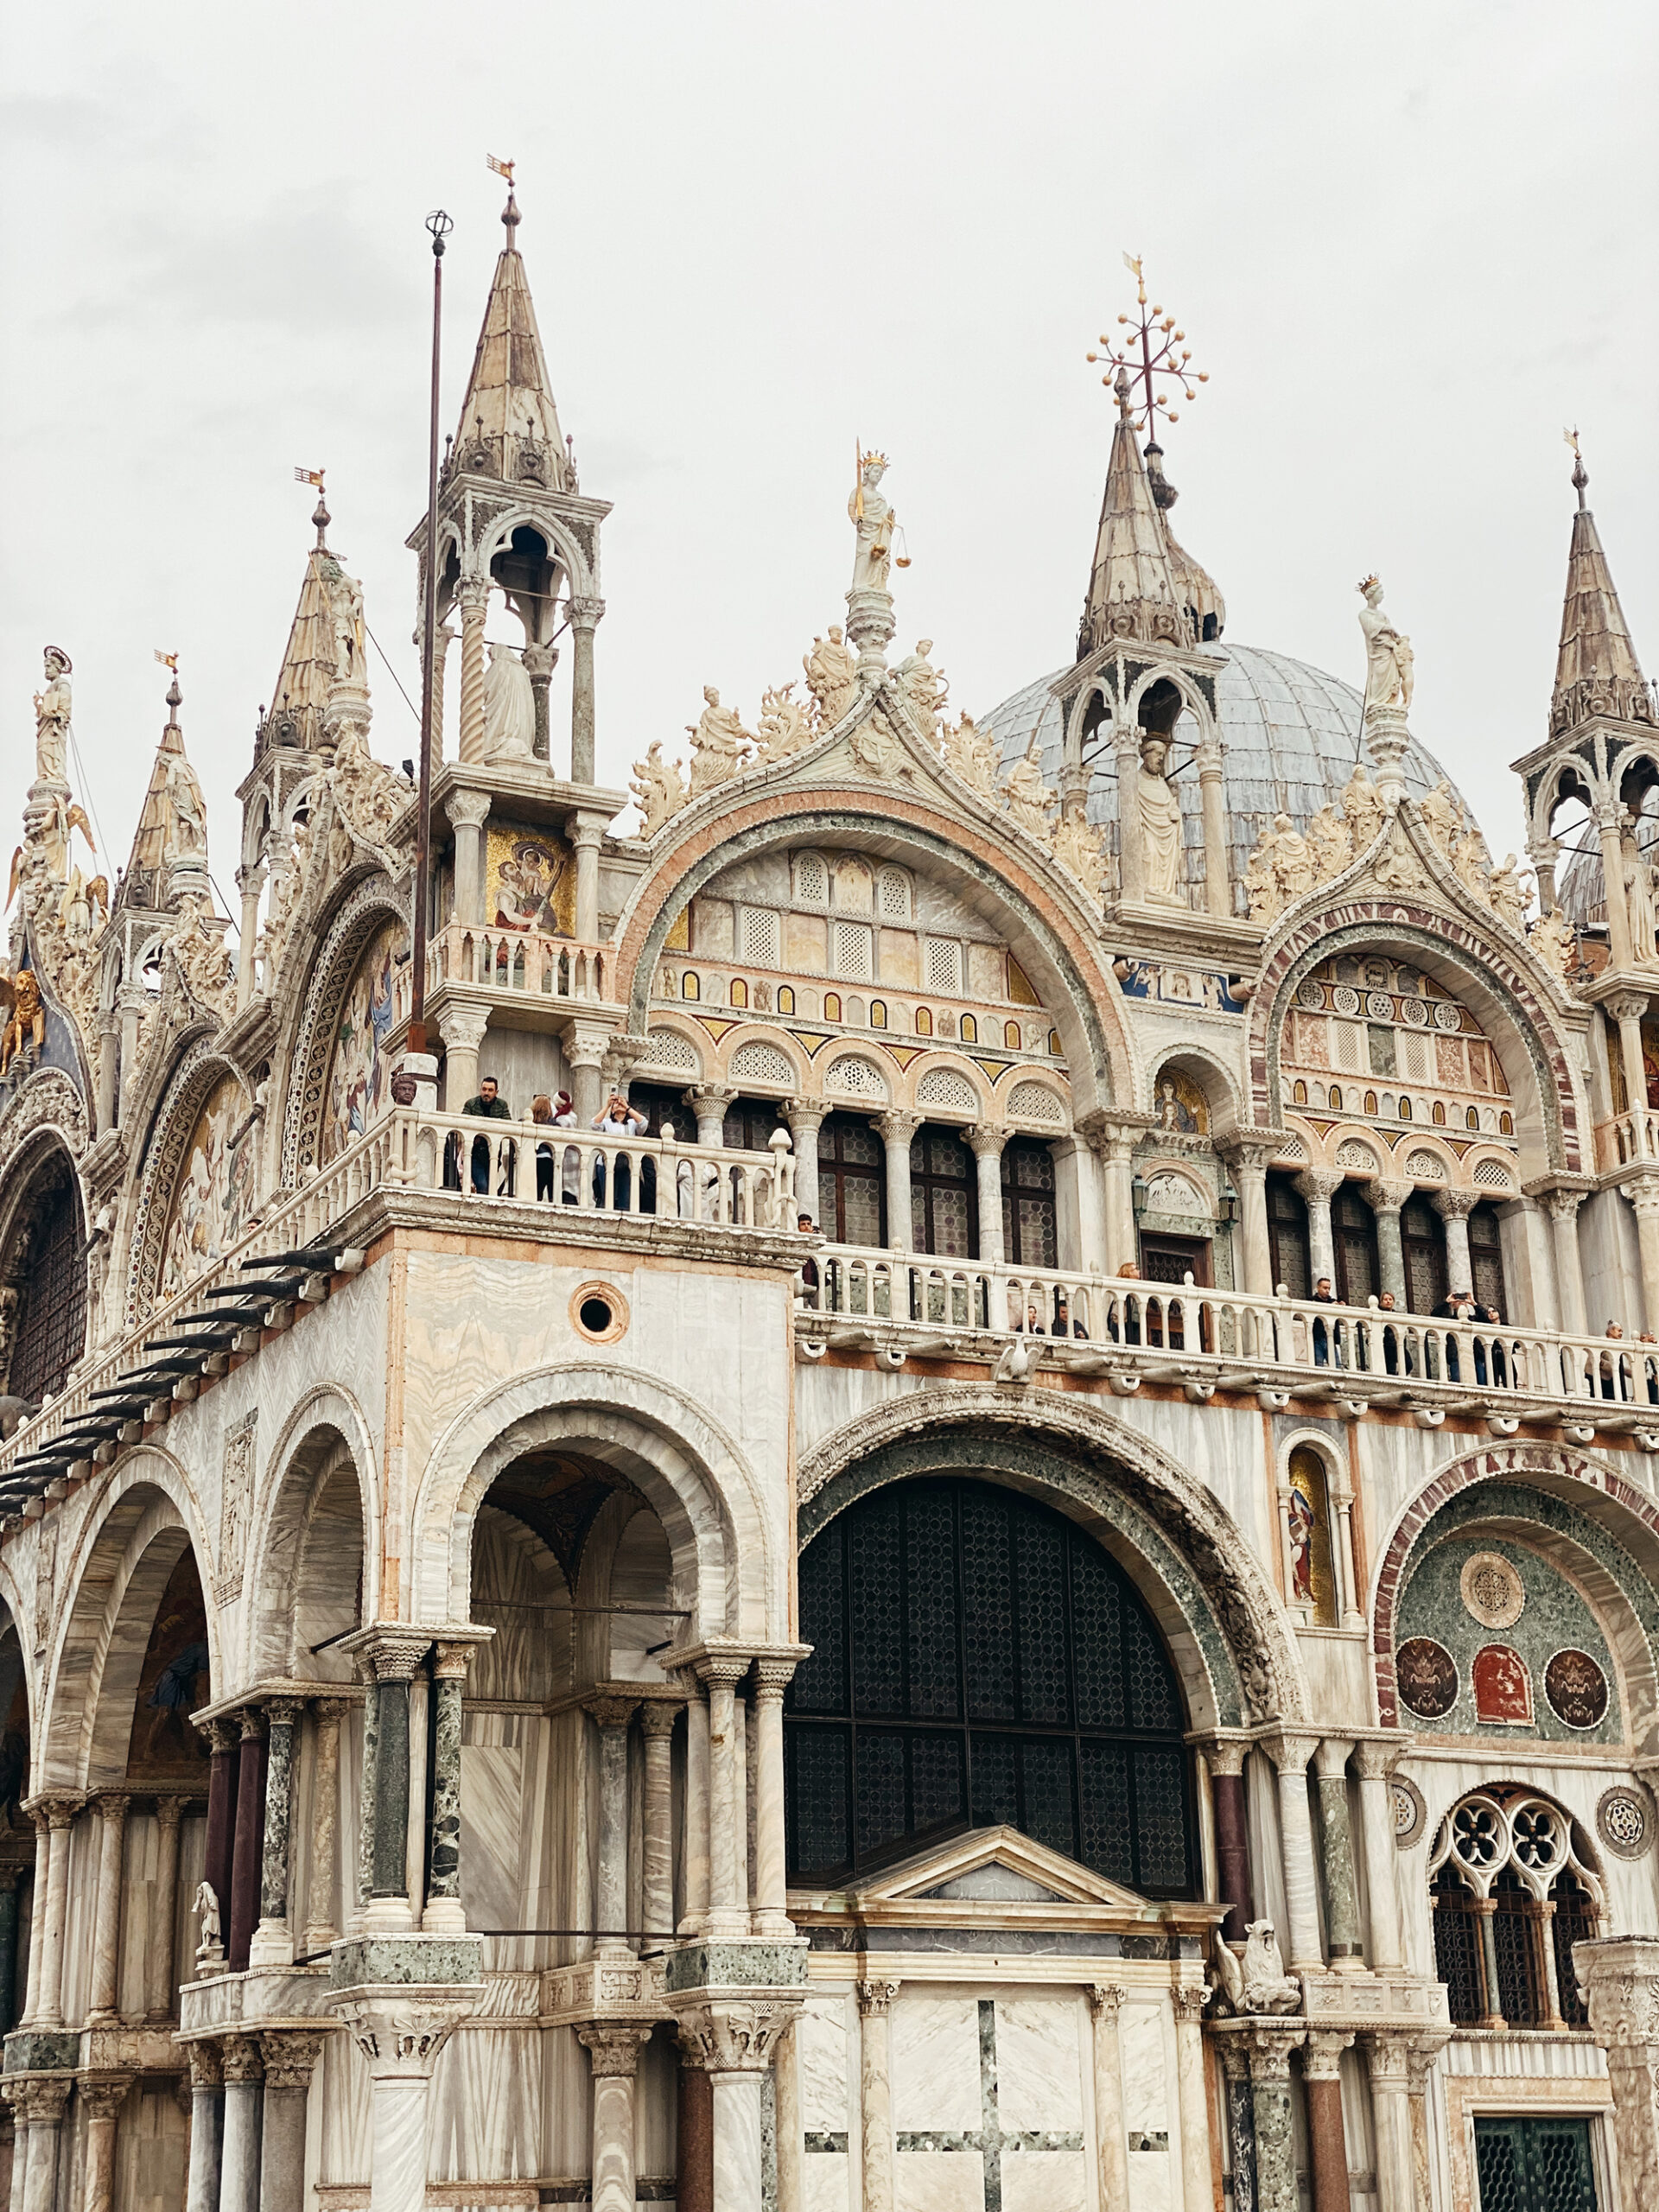 Italy Itinerary that covers Venice Doge Palace. So much history along with the best tour guides! || Darling Darleen Top CT Lifestyle Blogger